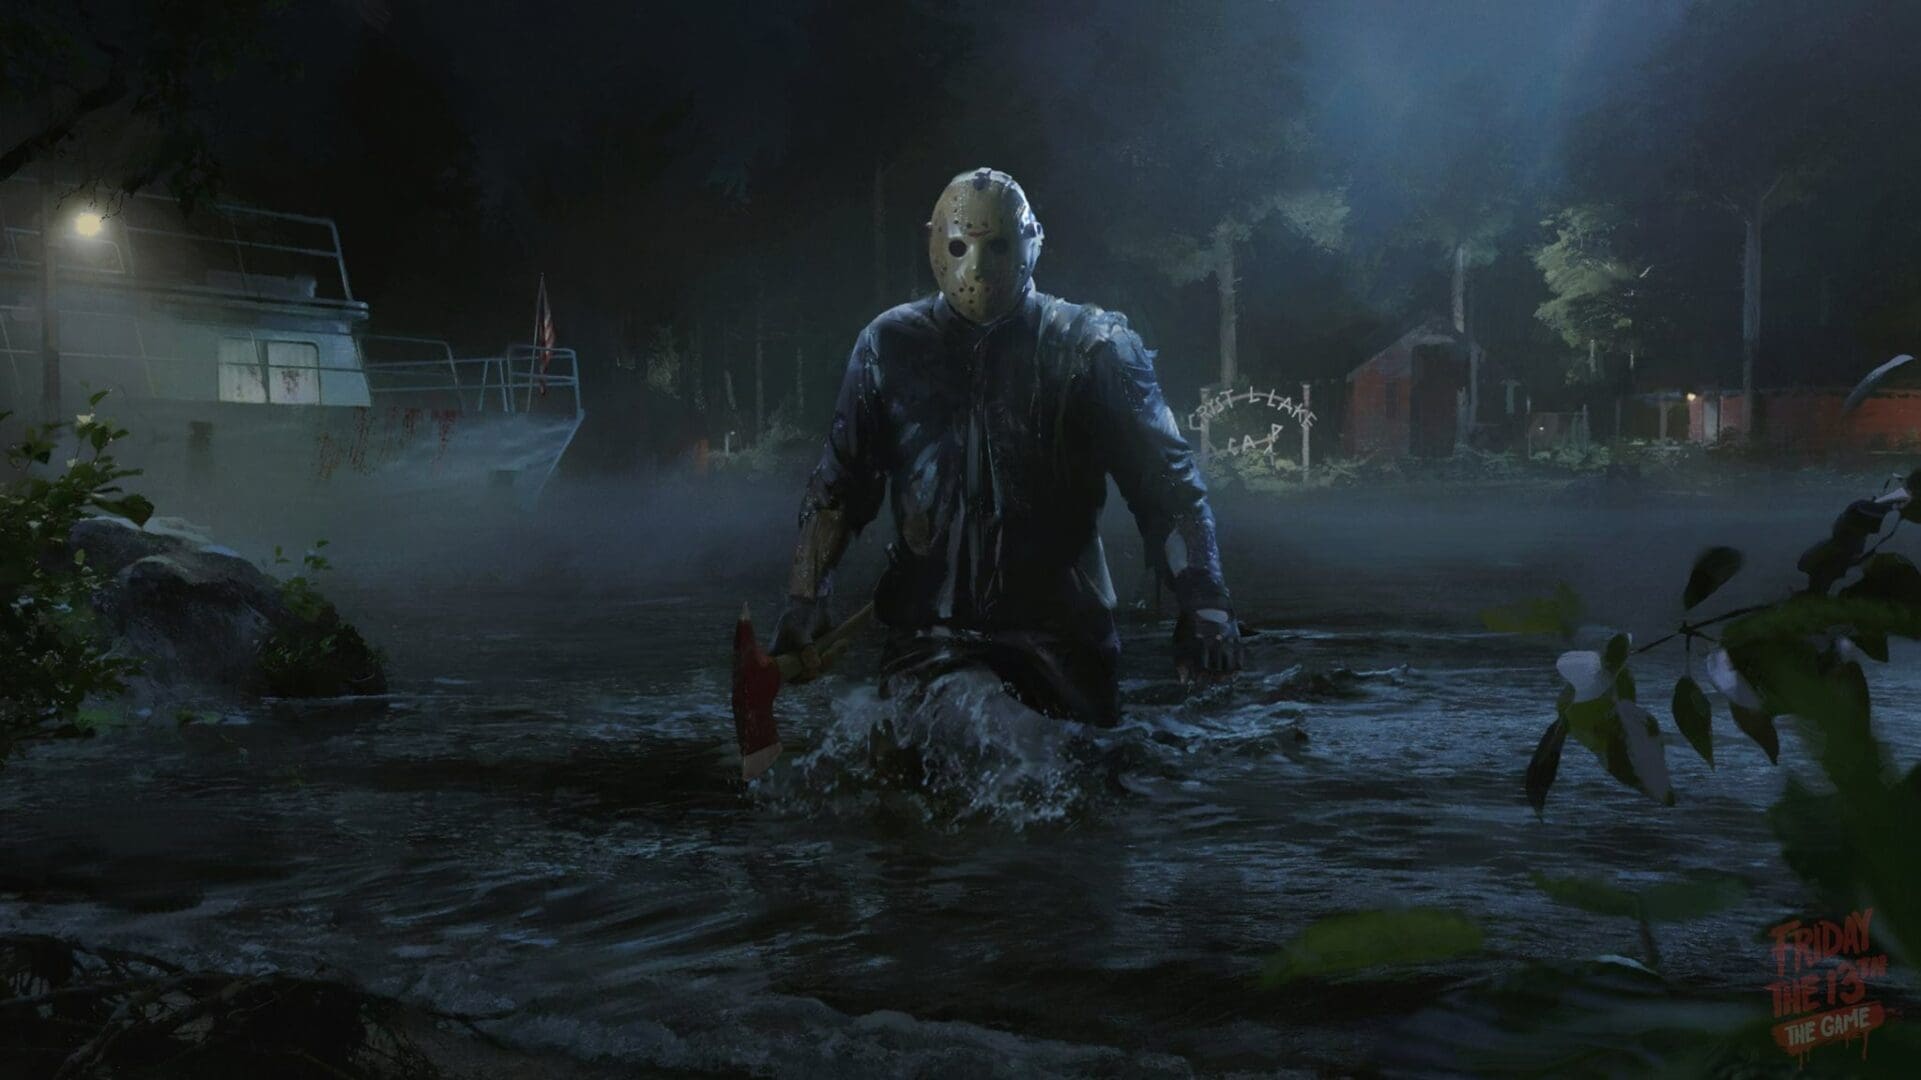 Friday The 13th Game Released Early for Streamers